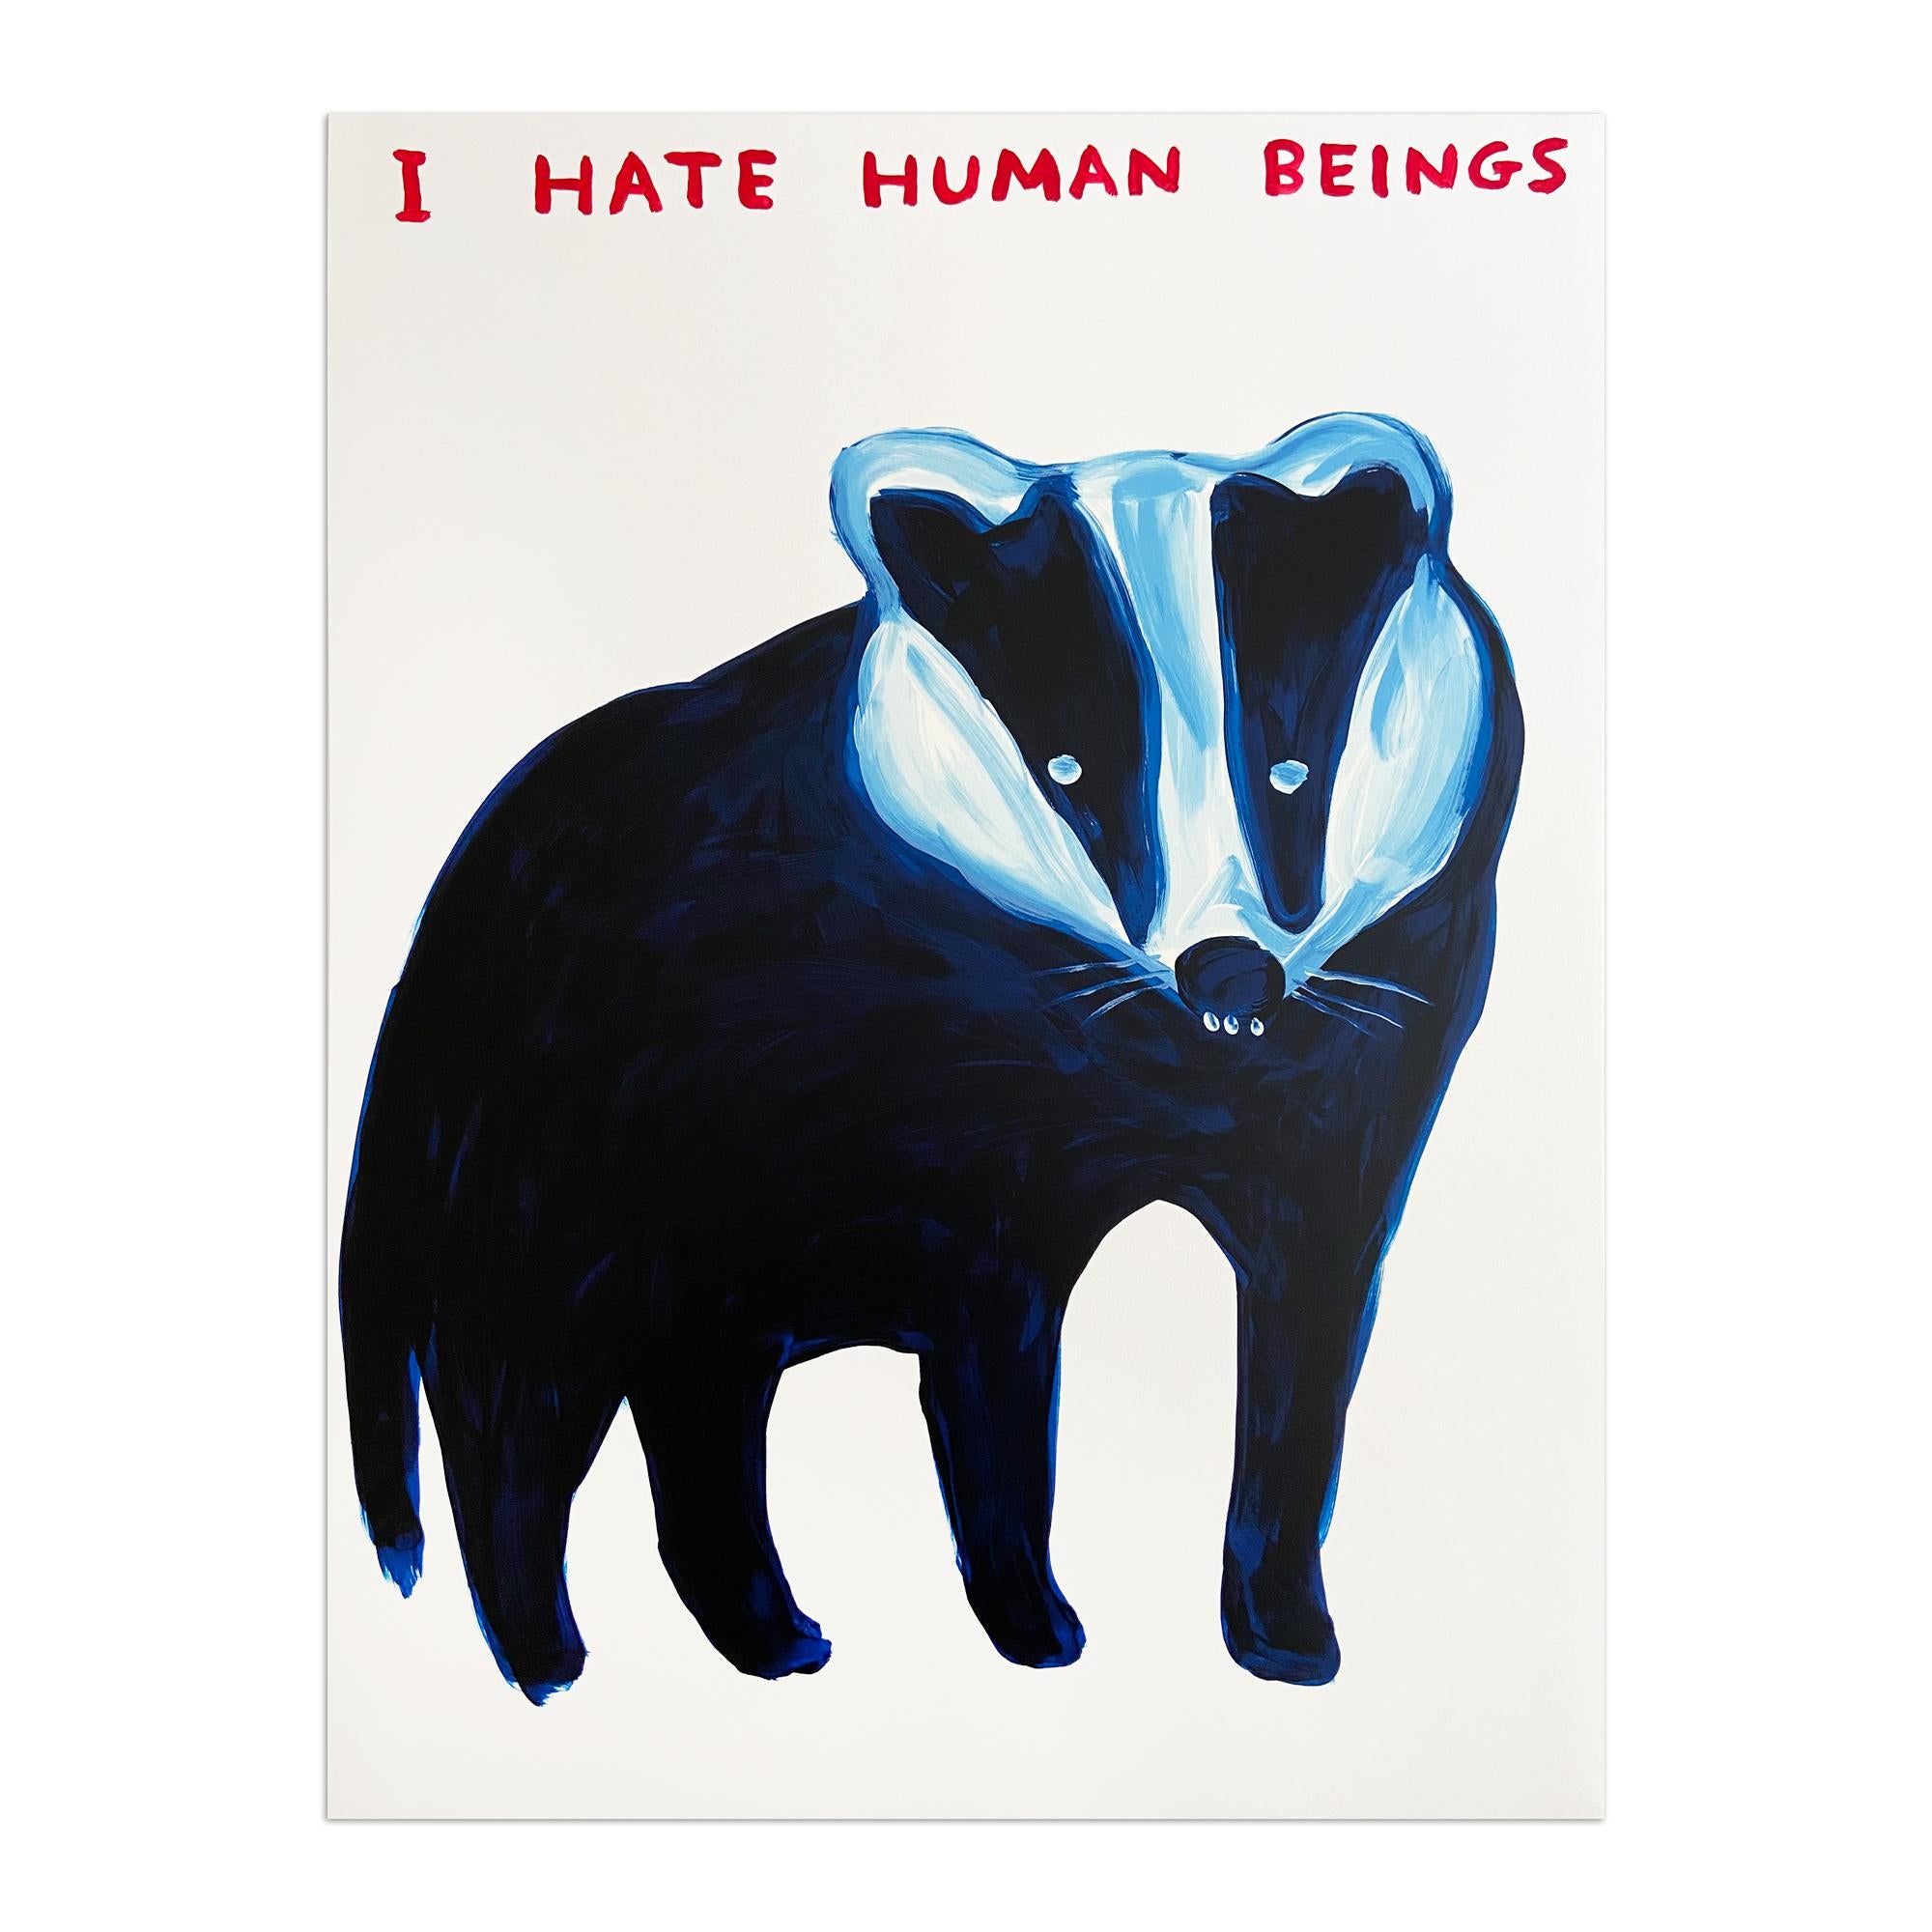 David Shrigley (British, b. 1968)
I Hate Human Beings, 2021
Medium: Screenprint in colours, on wove paper
Dimensions: 76 x 56 cm (29.9 x 22 in)
Edition of 125: Hand signed and numbered on accompanying certificate
Publisher: AllRightsReserved, Hong